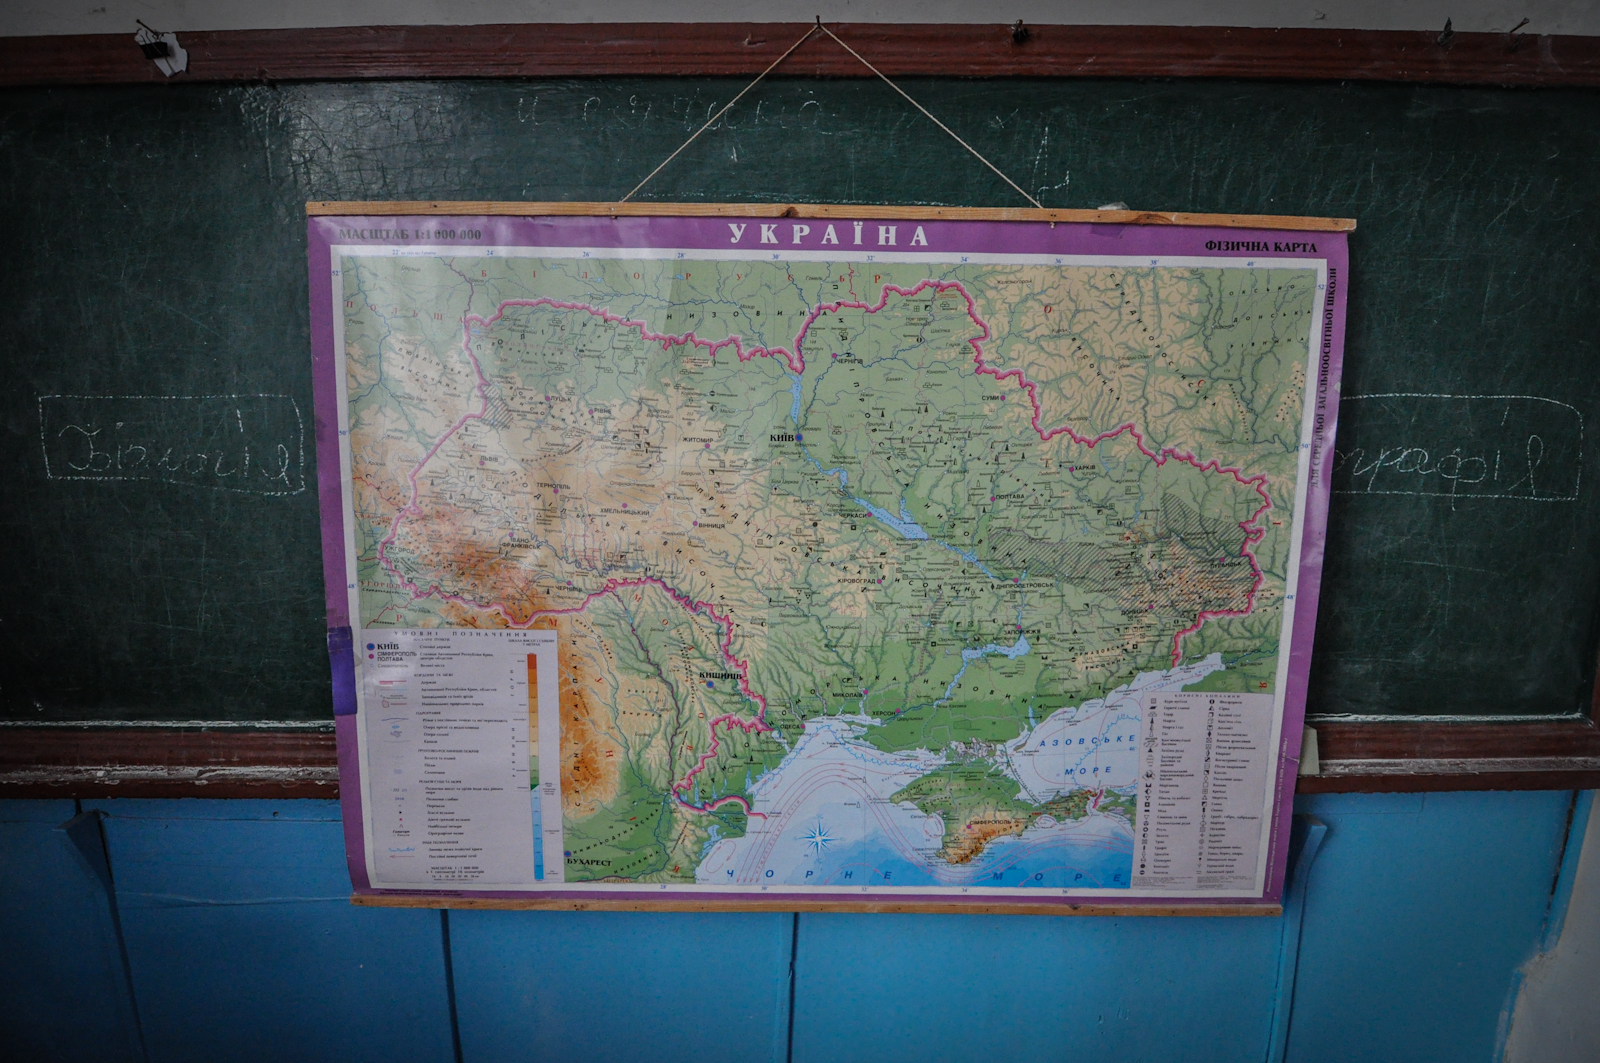 A map of Ukraine in a school near the Exclusion Zone, including Crimea